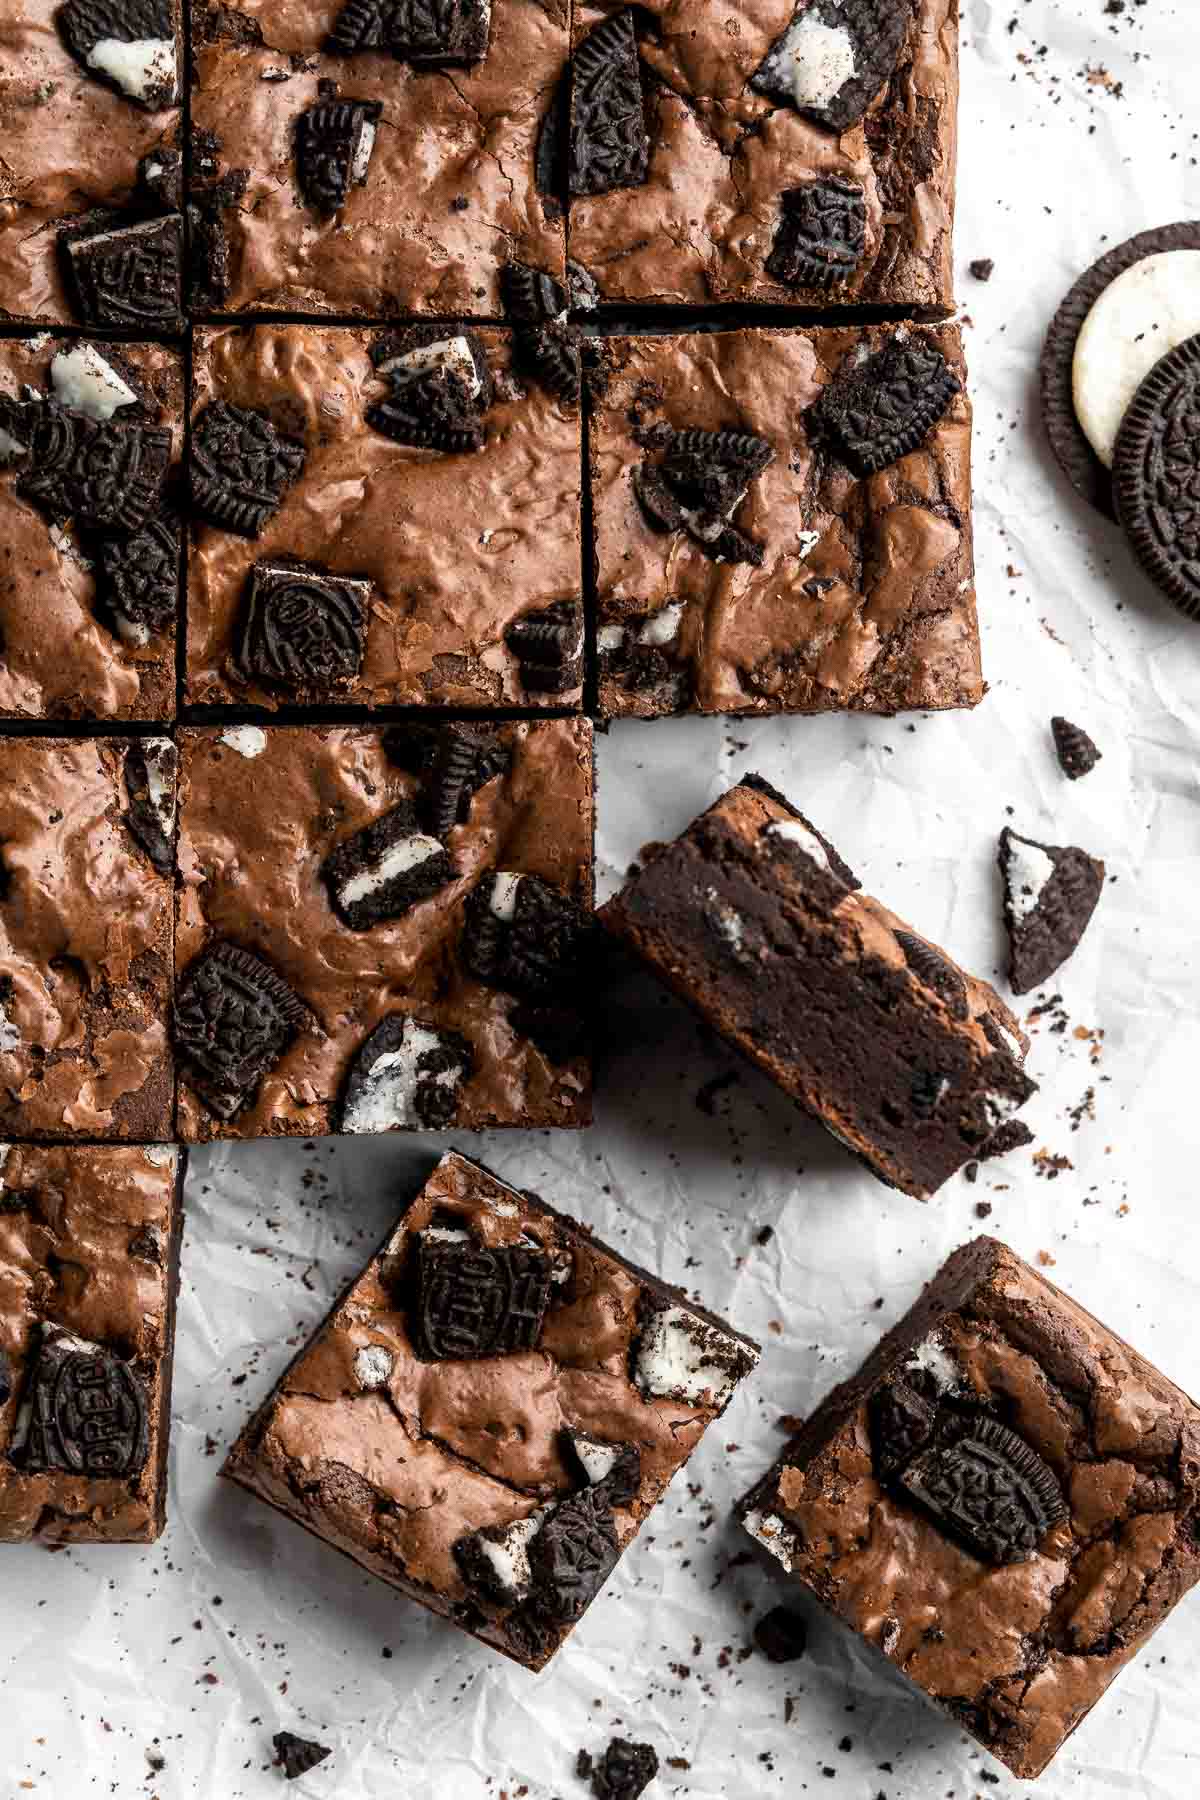 Oreo Brownies are a fudgy, rich and decadent dessert that is quick and easy to make from scratch in about 30 minutes using simple ingredients. | aheadofthyme.com